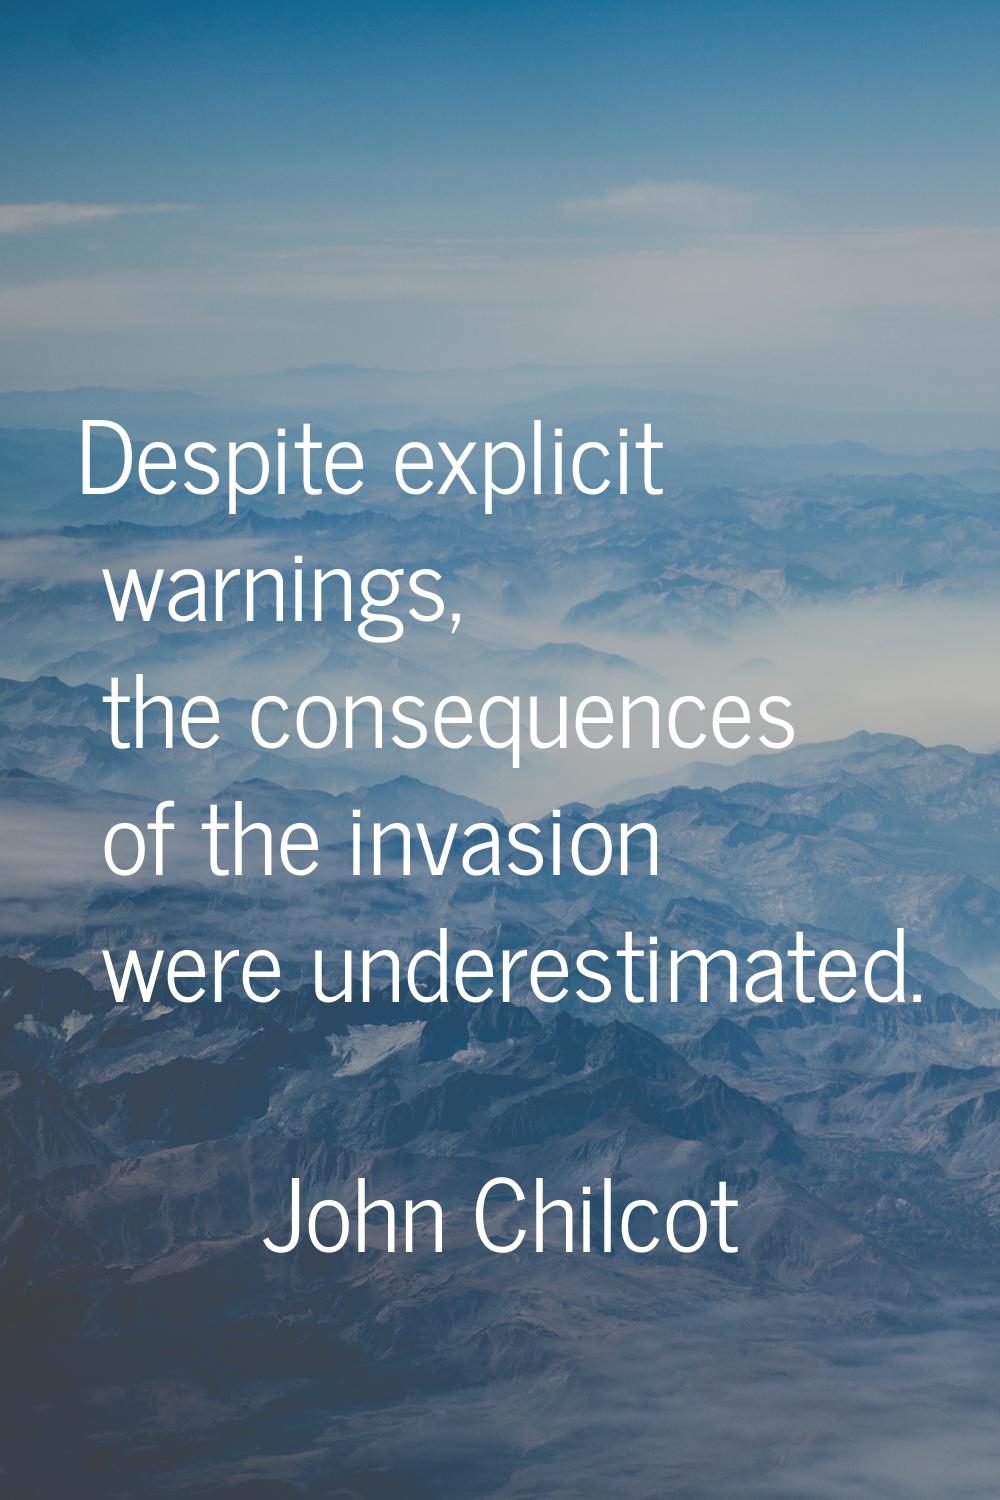 Despite explicit warnings, the consequences of the invasion were underestimated.